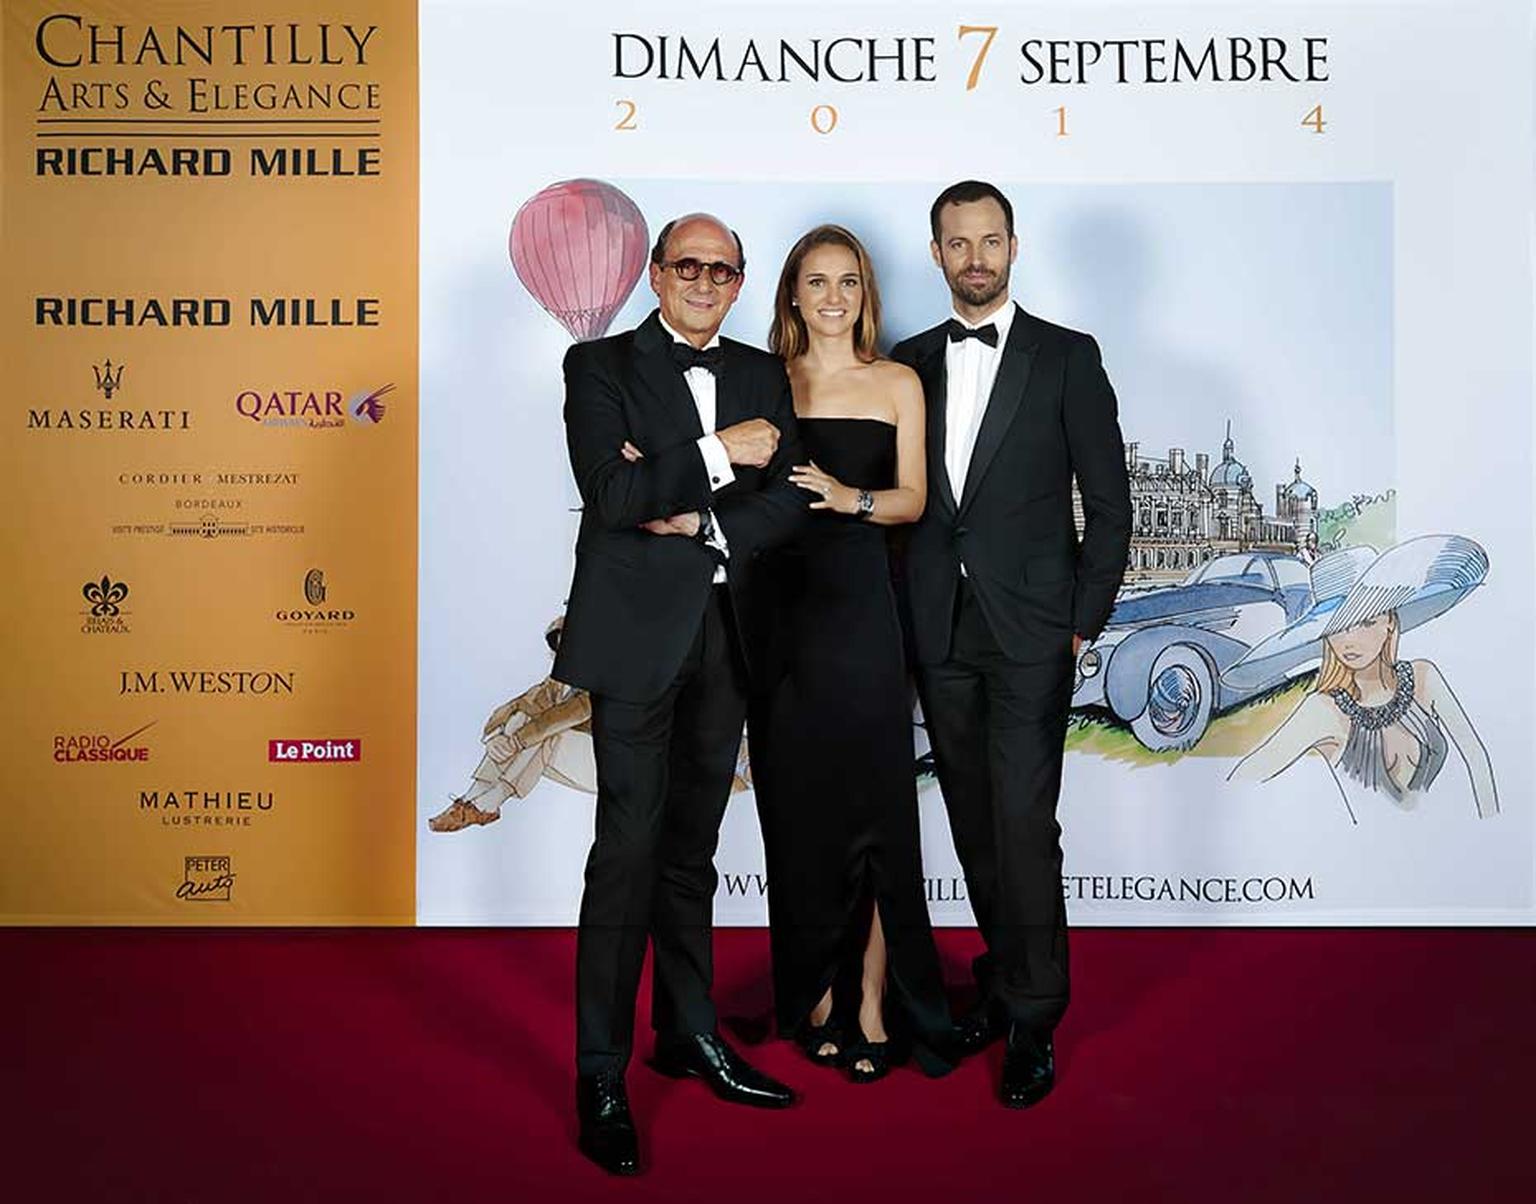 Richard Mille, left, stands beside Natalie Portman - friend of Richard Mille - and her husband, Benjamin Millepied, at a gala dinner held during the inaugural Chantilly Arts & Elegance event this September, sponsored by Richard Mille.